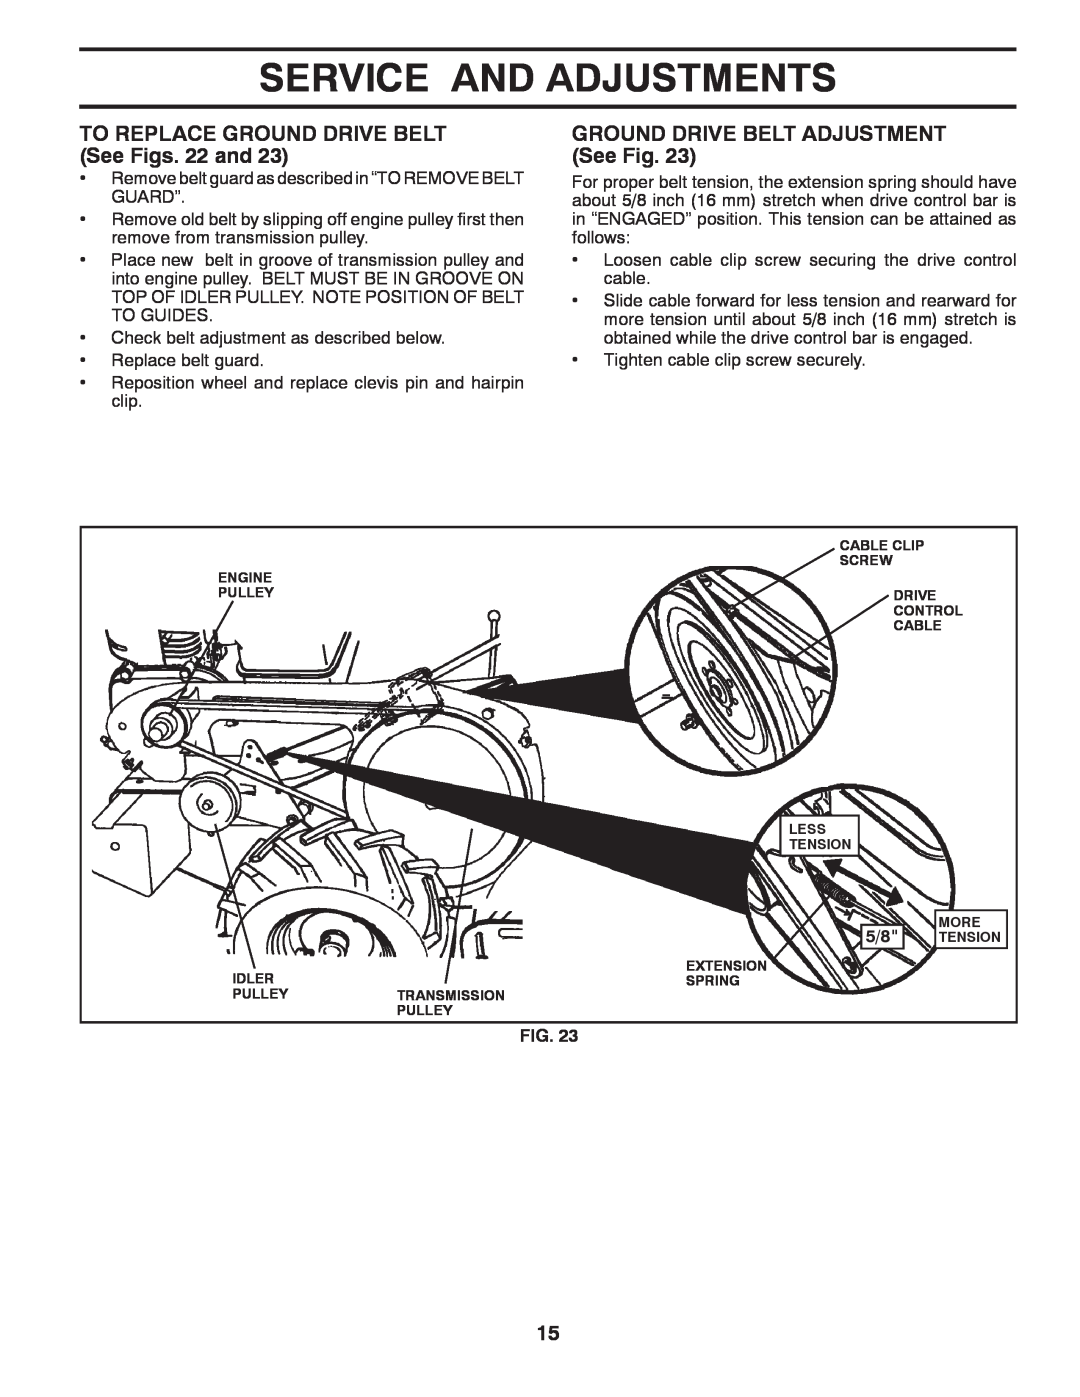 Poulan PRRT875X manual TO REPLACE GROUND DRIVE BELT See Figs. 22 and, GROUND DRIVE BELT ADJUSTMENT See Fig 